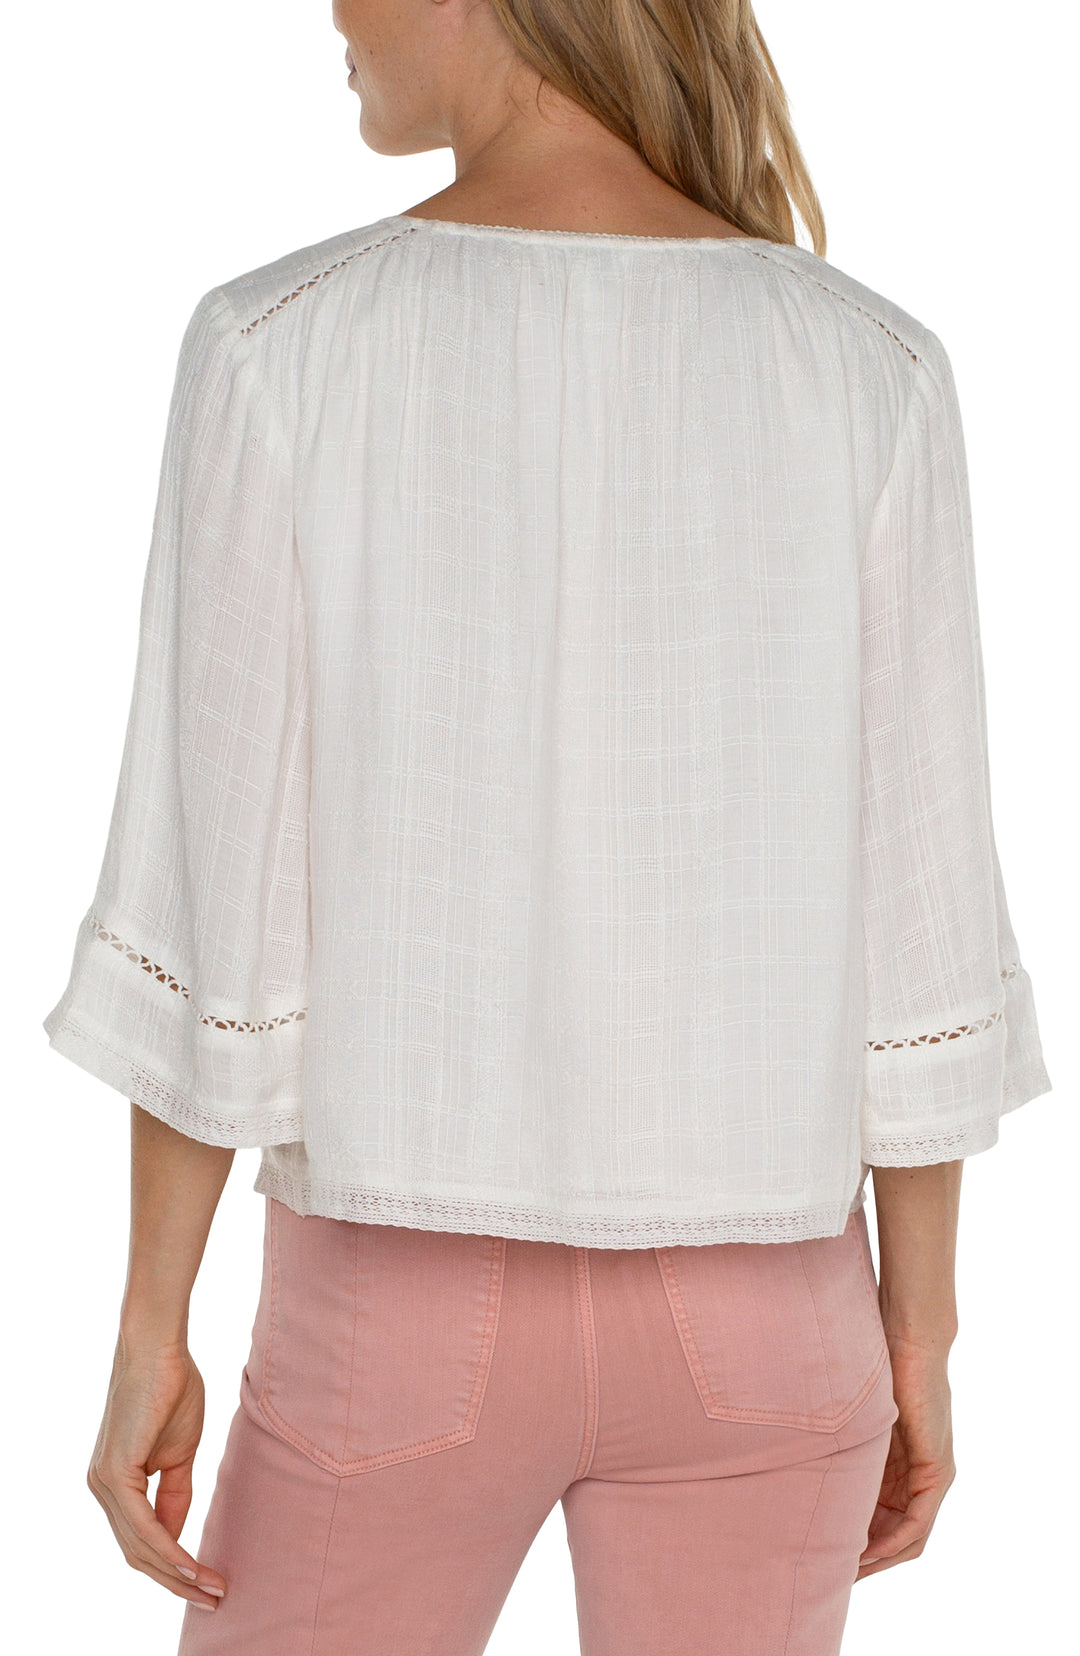 SHIRRED WOVEN TIE FRONT TOP W/TRIM - OFF WHITE